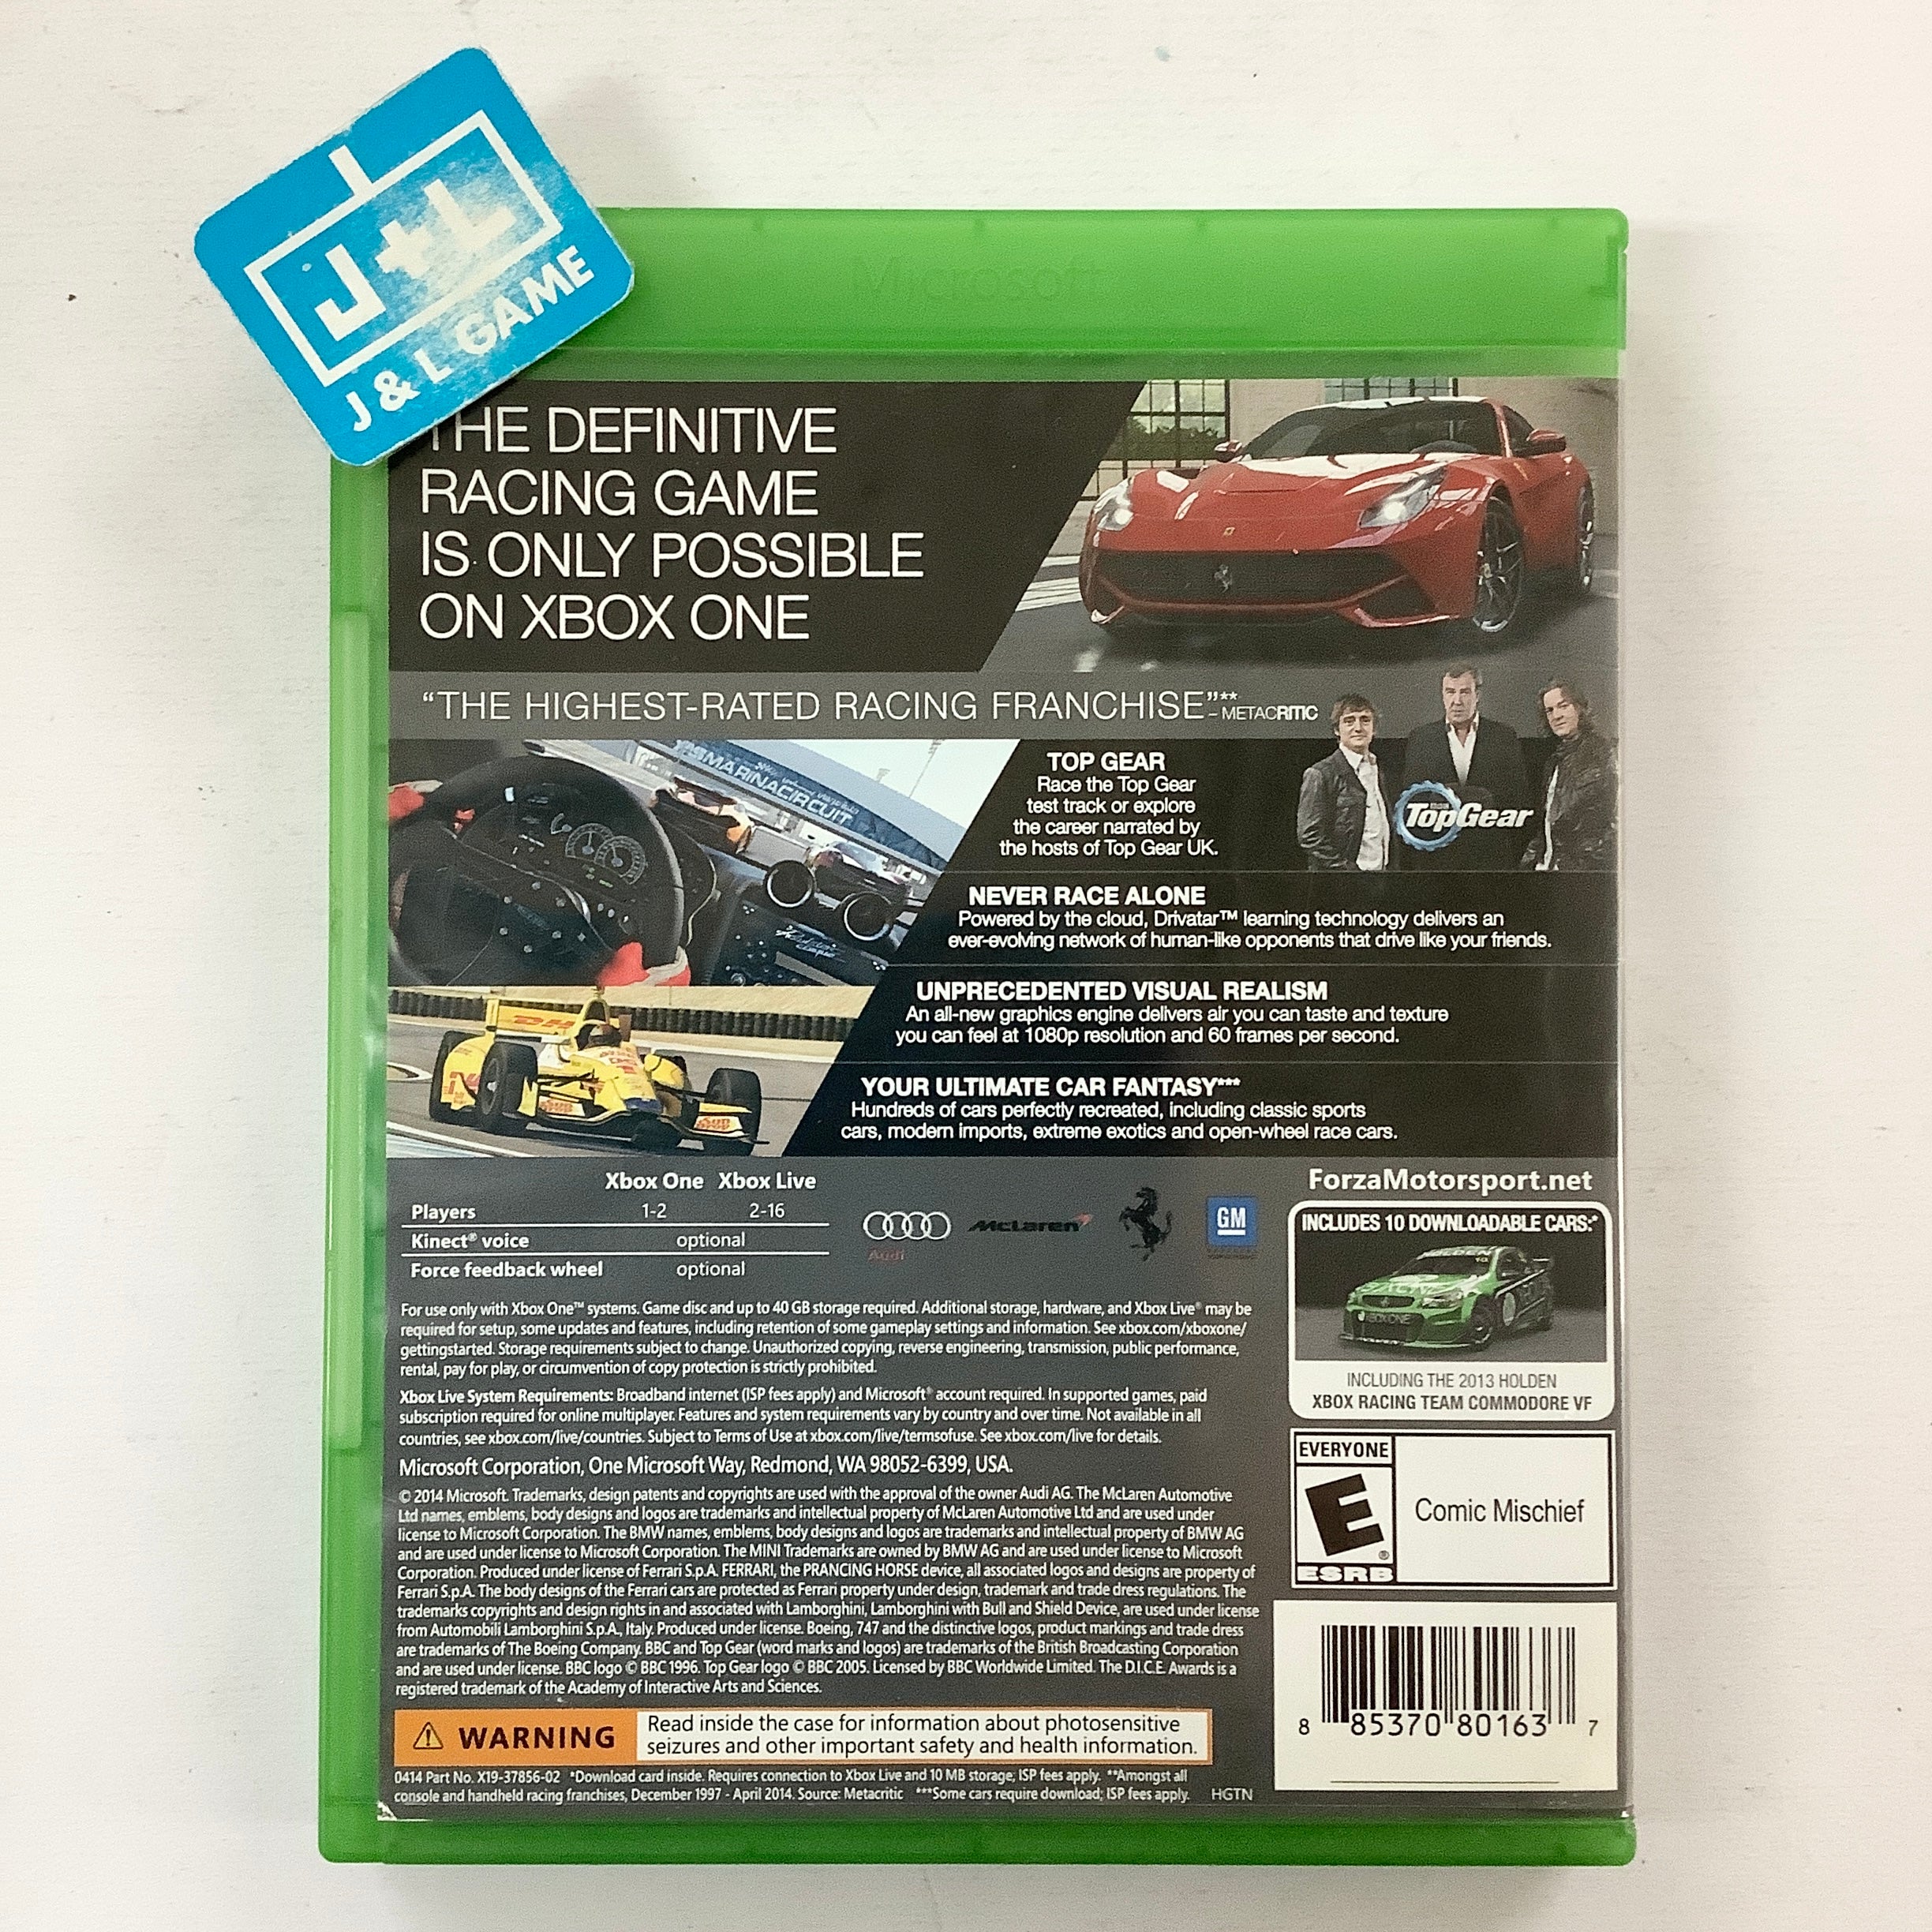 Forza Motorsport 5 (Racing Game of the Year Edition) - (XB1) Xbox One [Pre-Owned] Video Games Microsoft Game Studios   